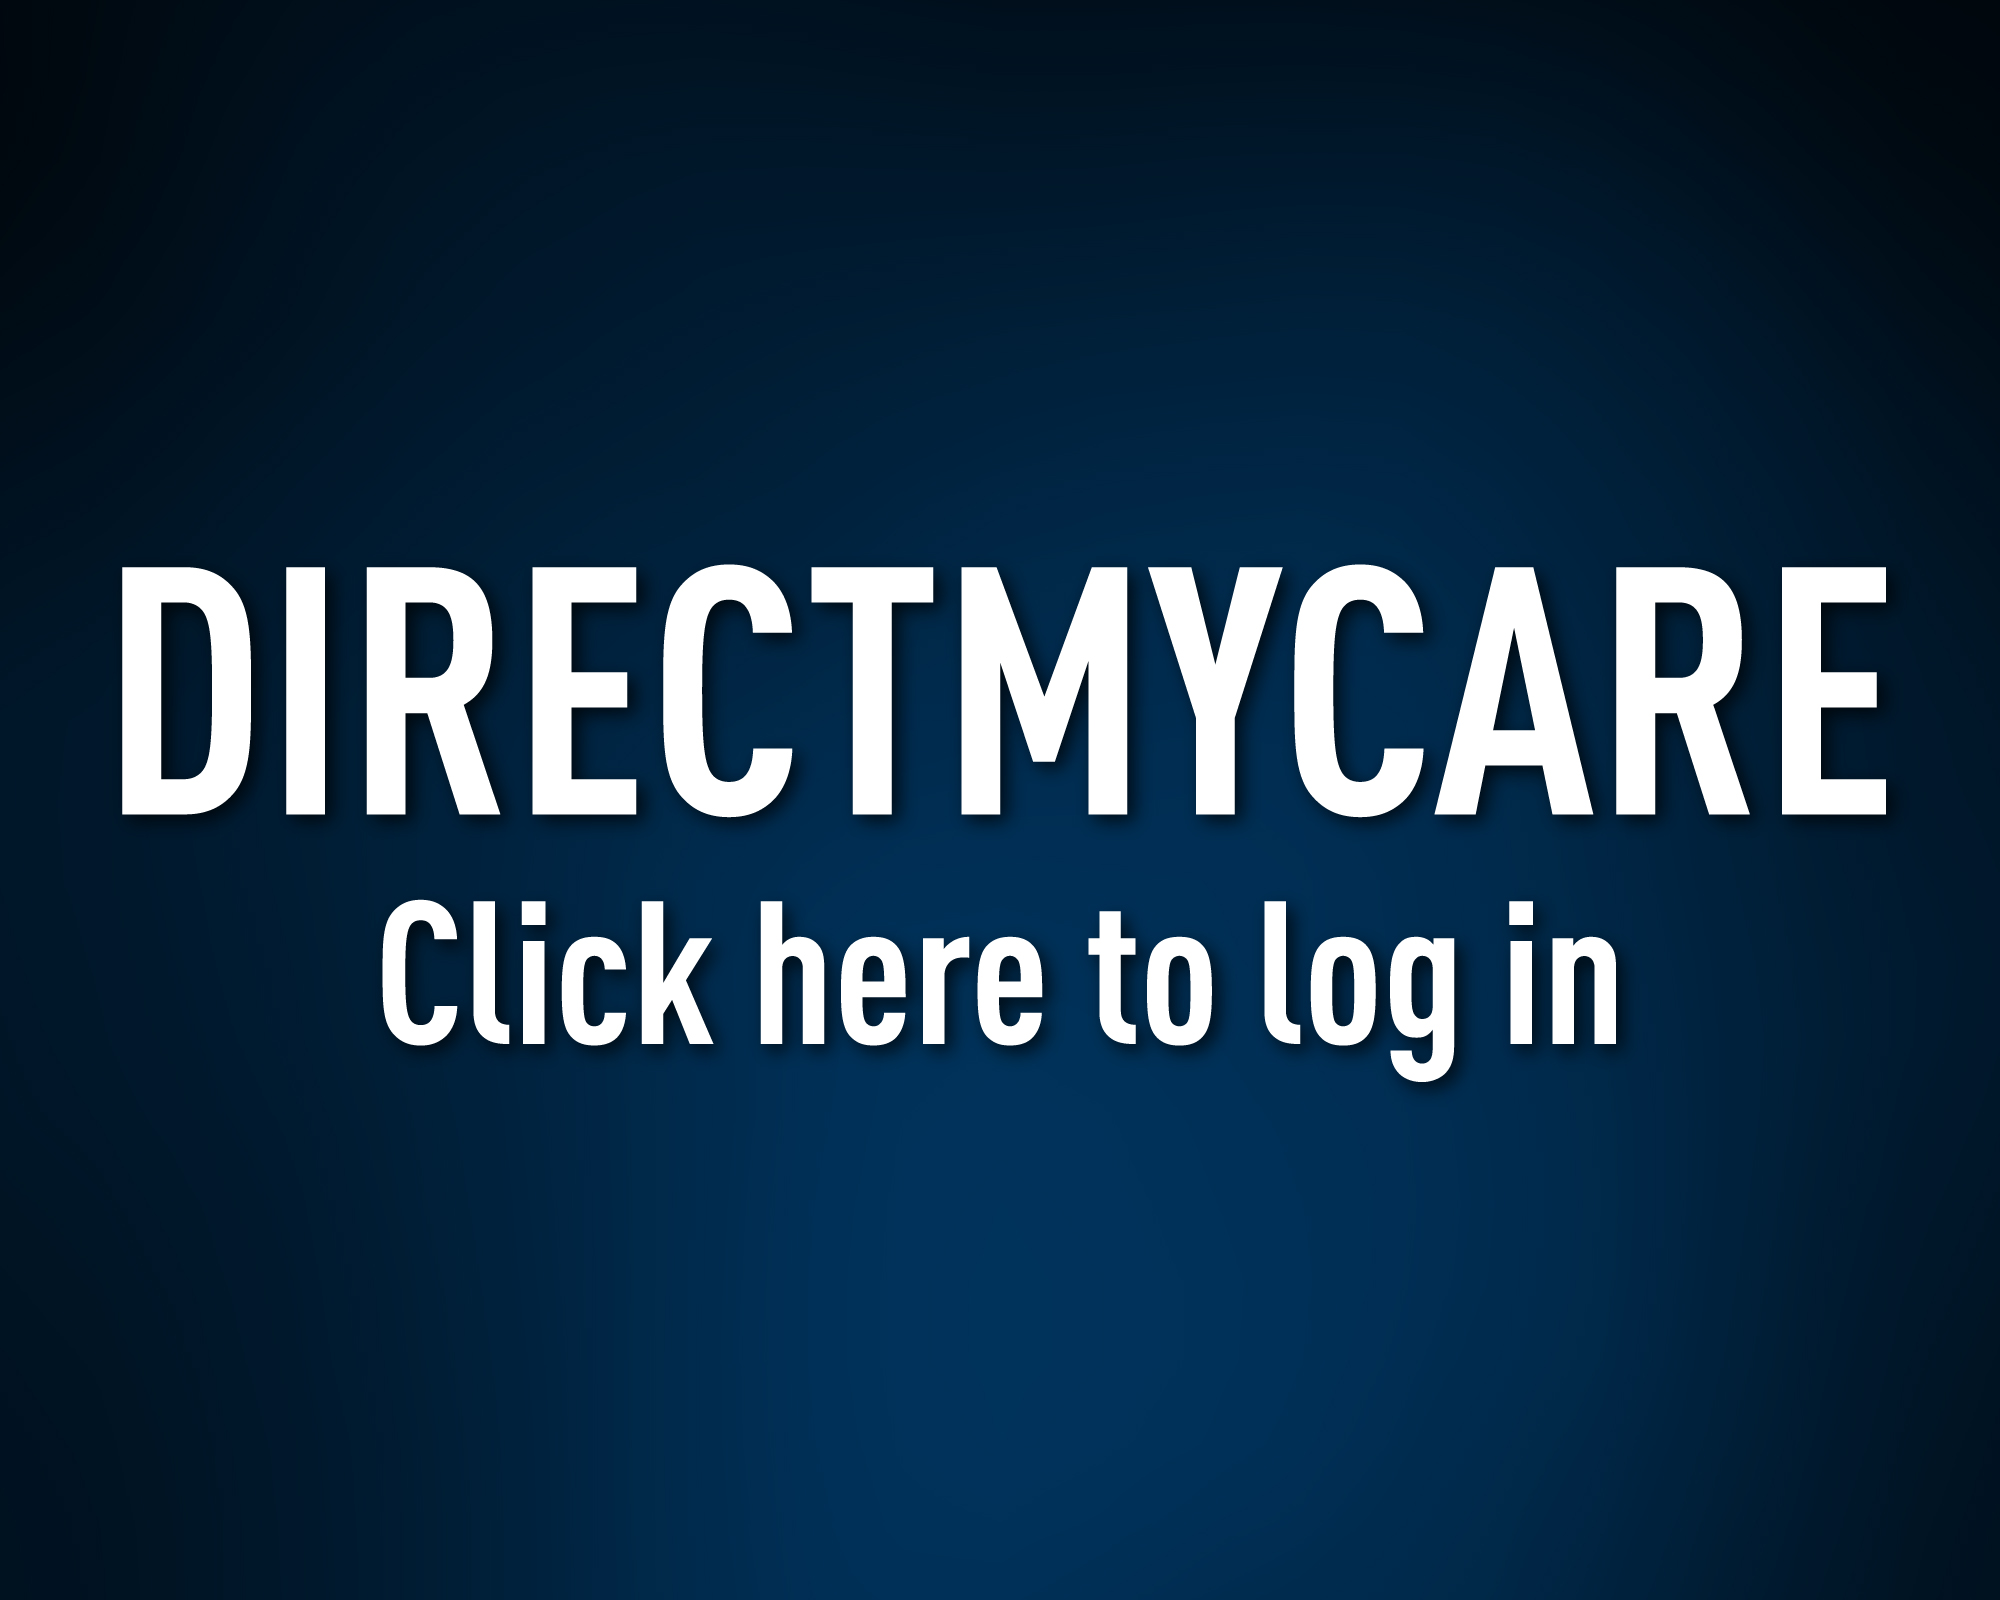 DirectMyCare. Click here to log in